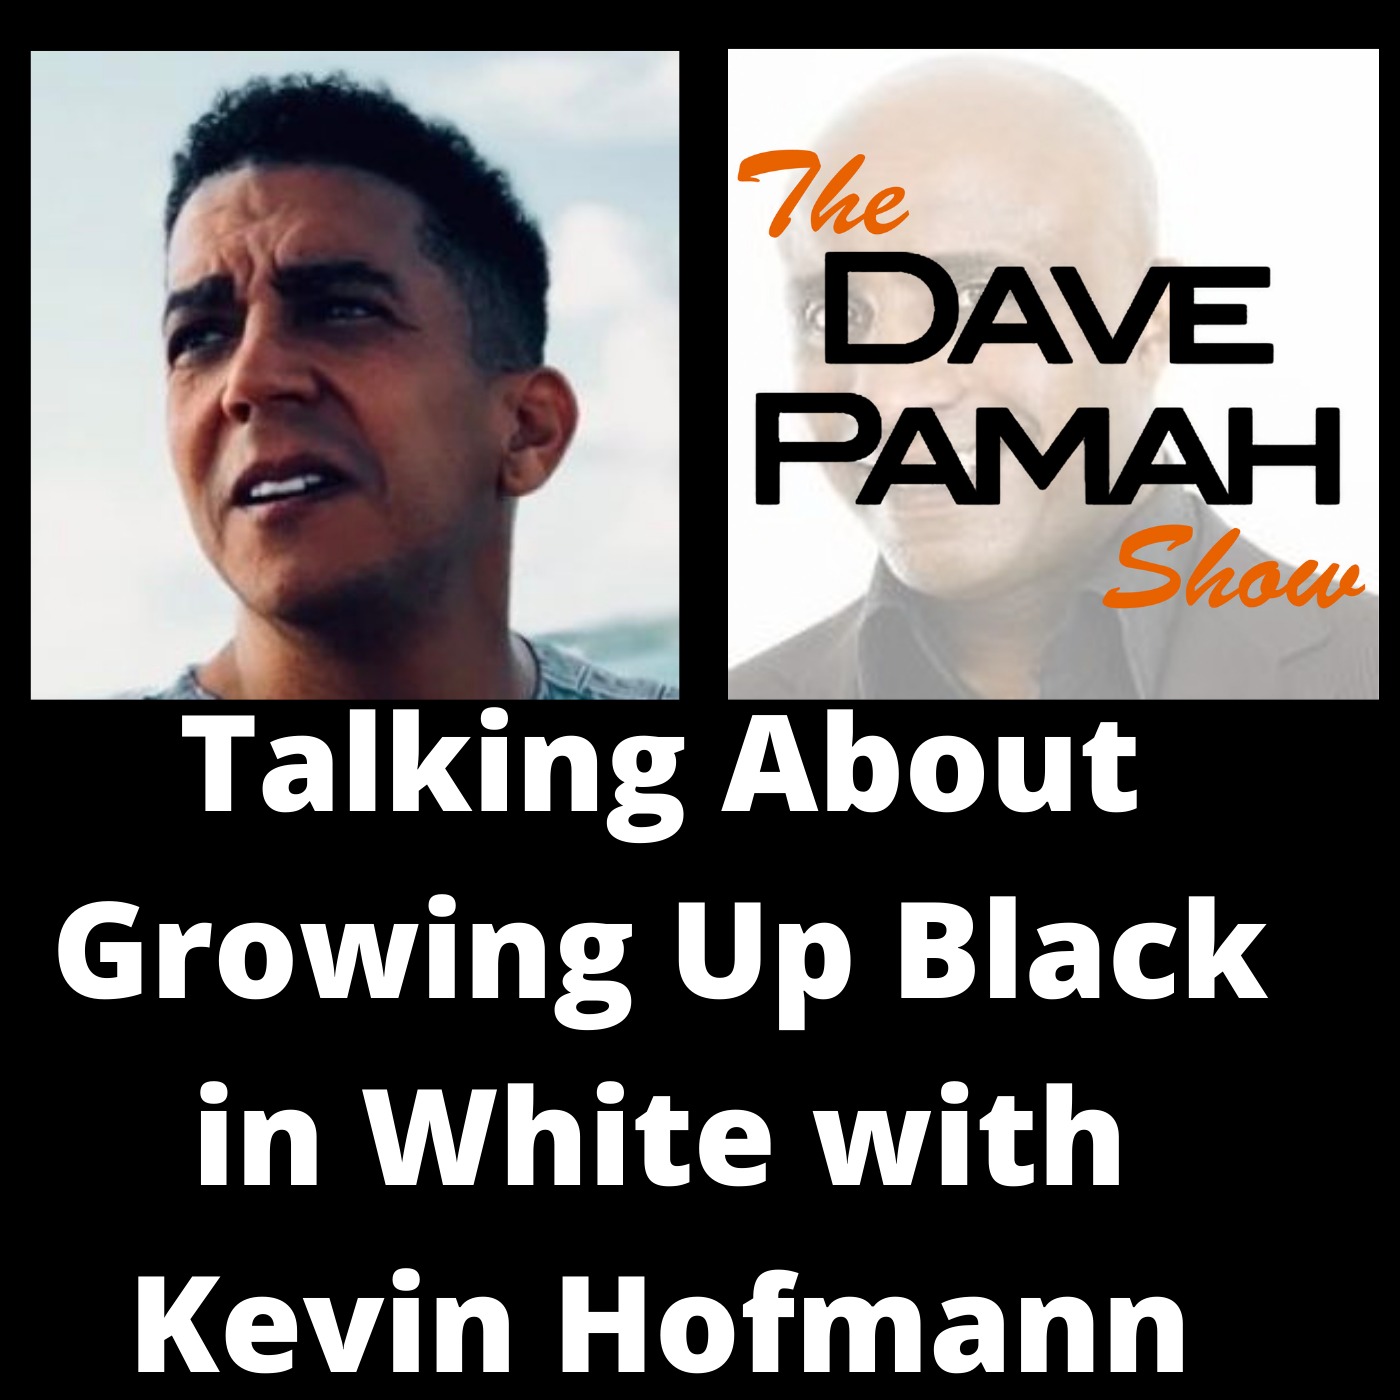 Talking About Growing Up Black in White with Kevin Hofmann